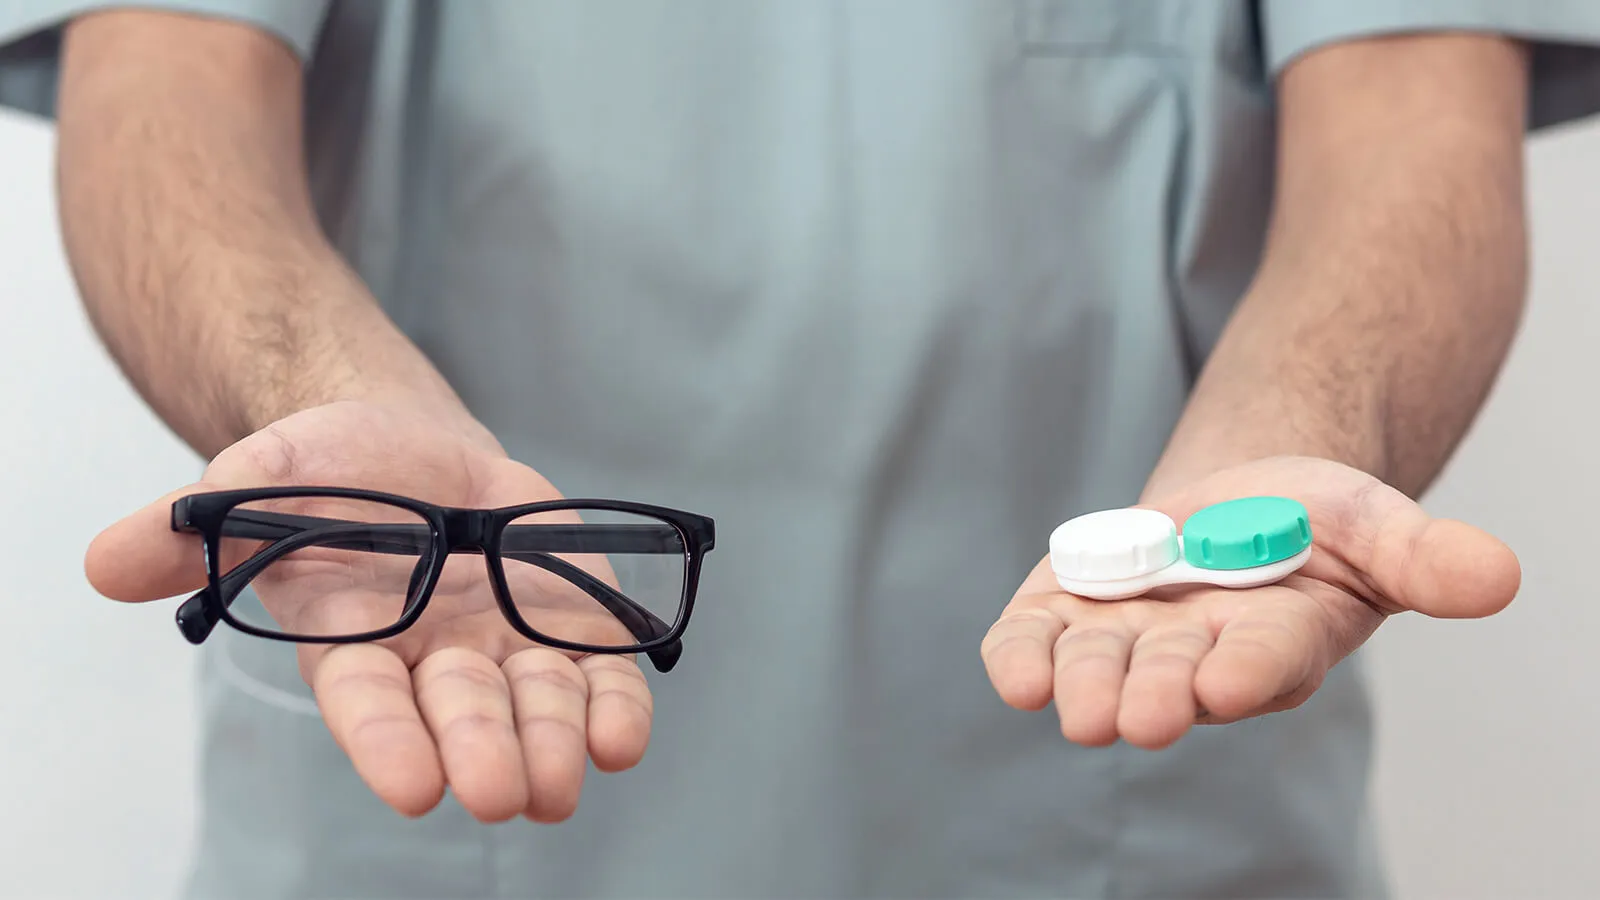 How are glasses better than contact lenses?